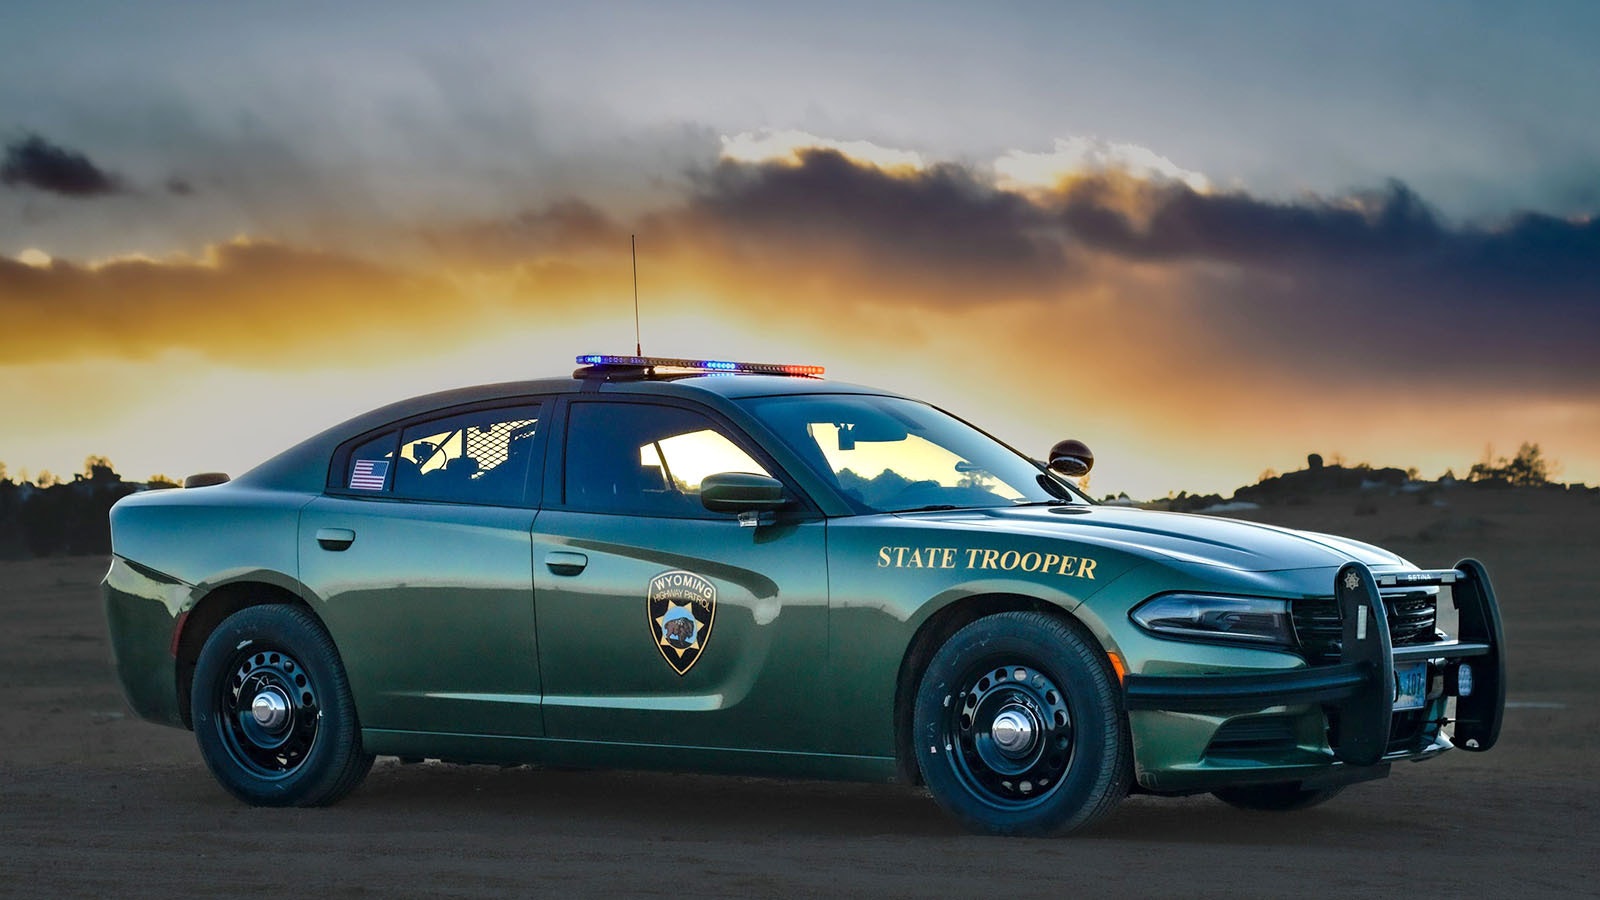 Wyoming Highway Patrol’s 2023 entry in the annual best-looking cruiser contest.